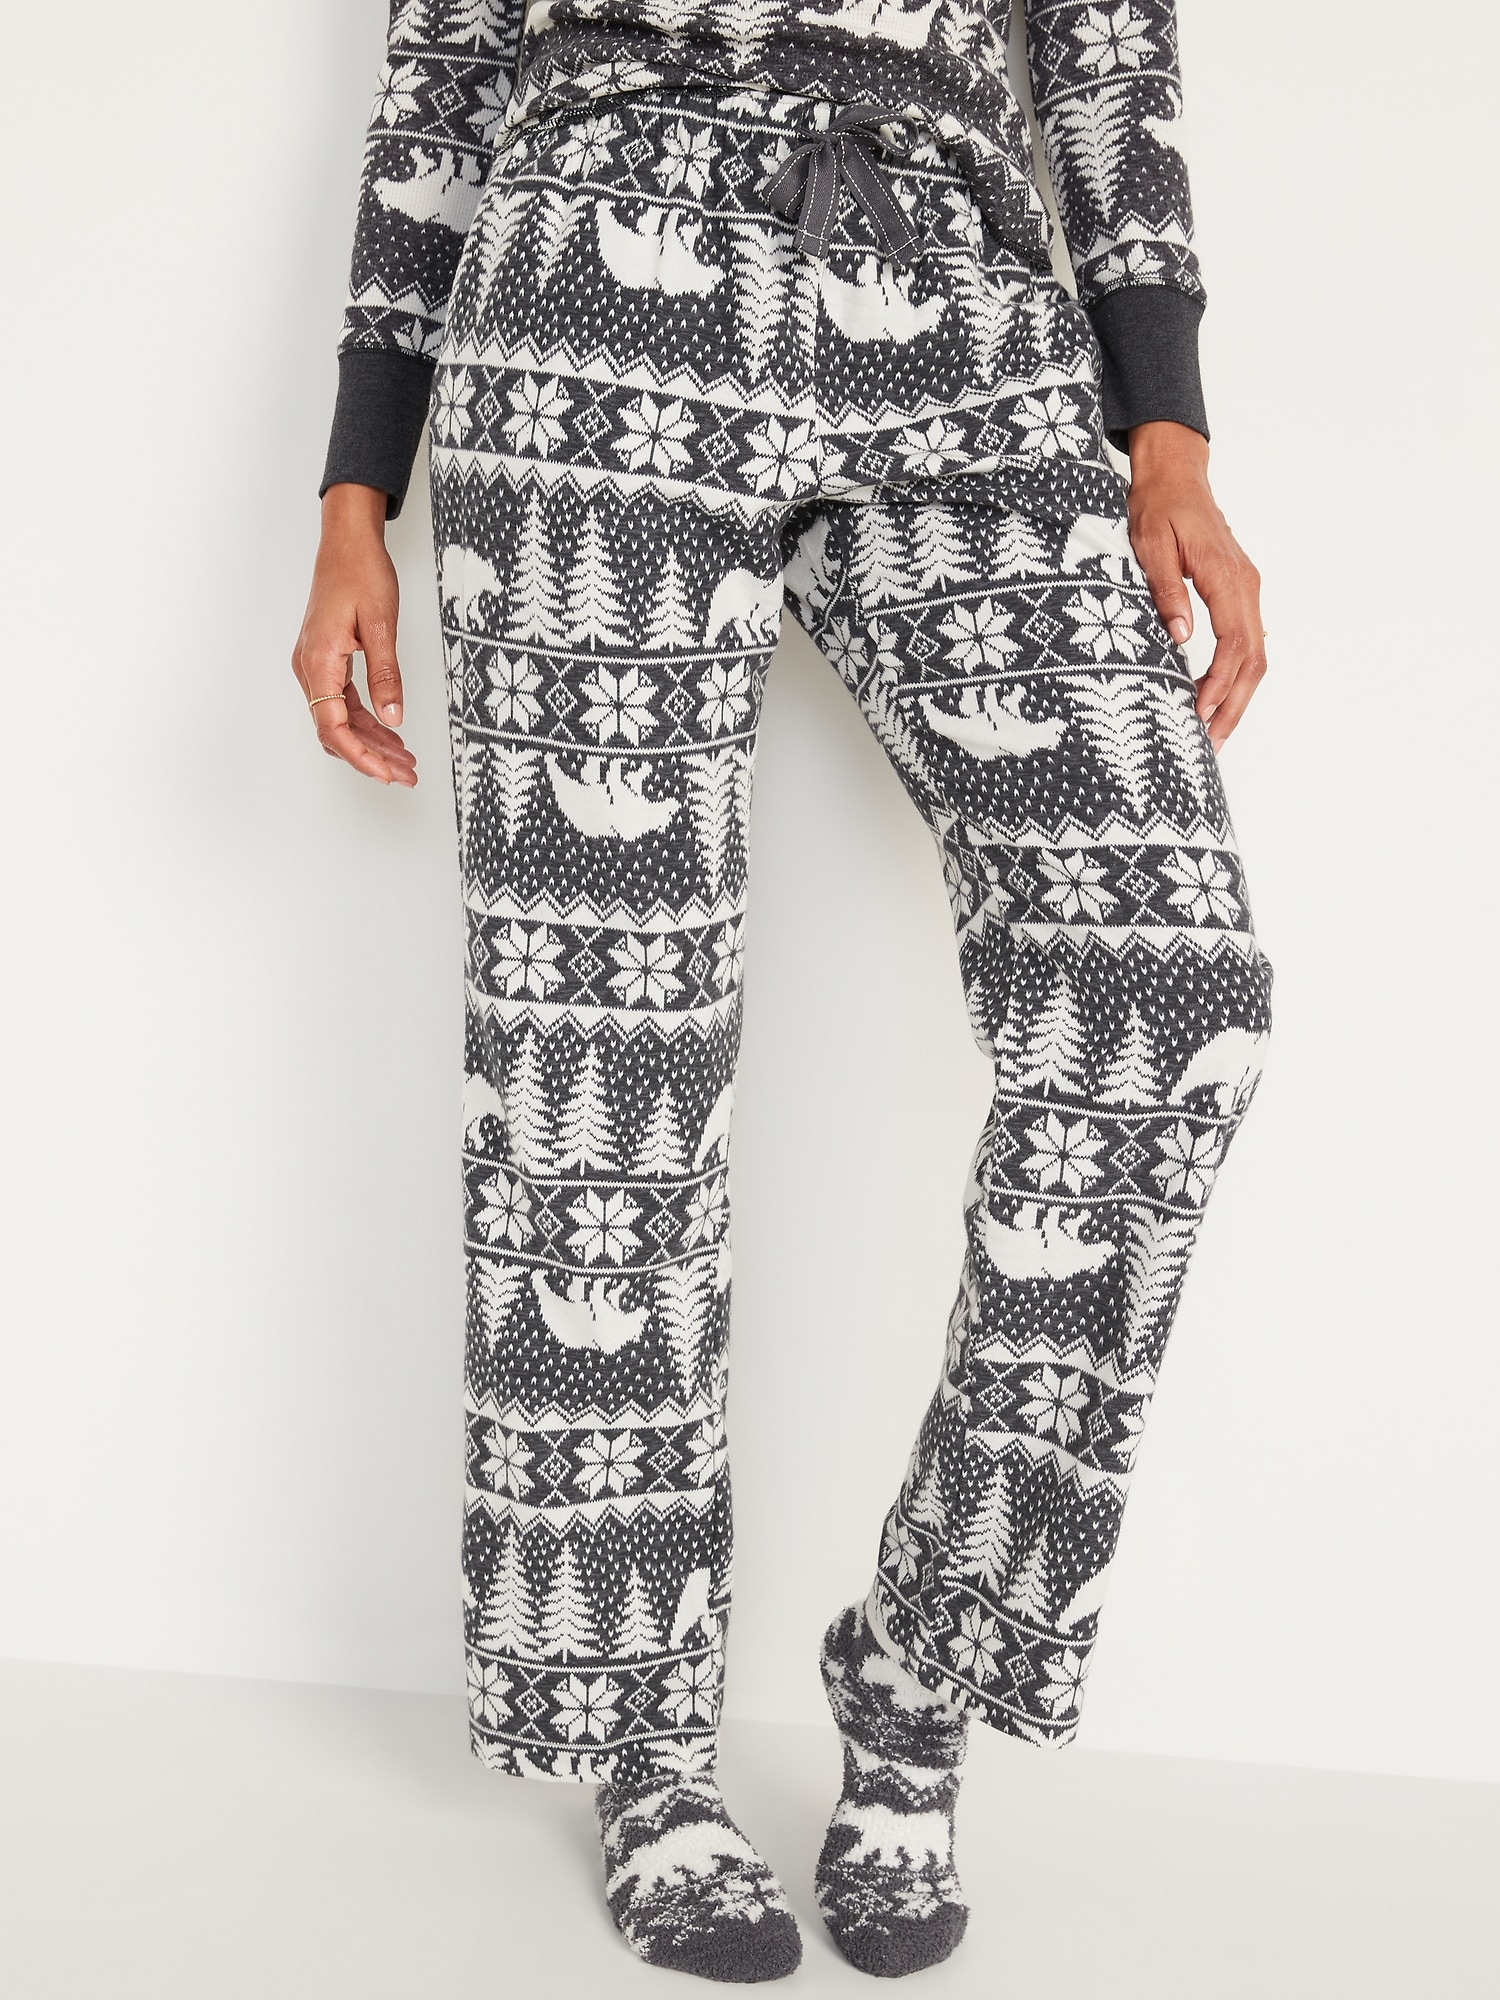 Old Navy Printed Flannel Pajama Pants for Women